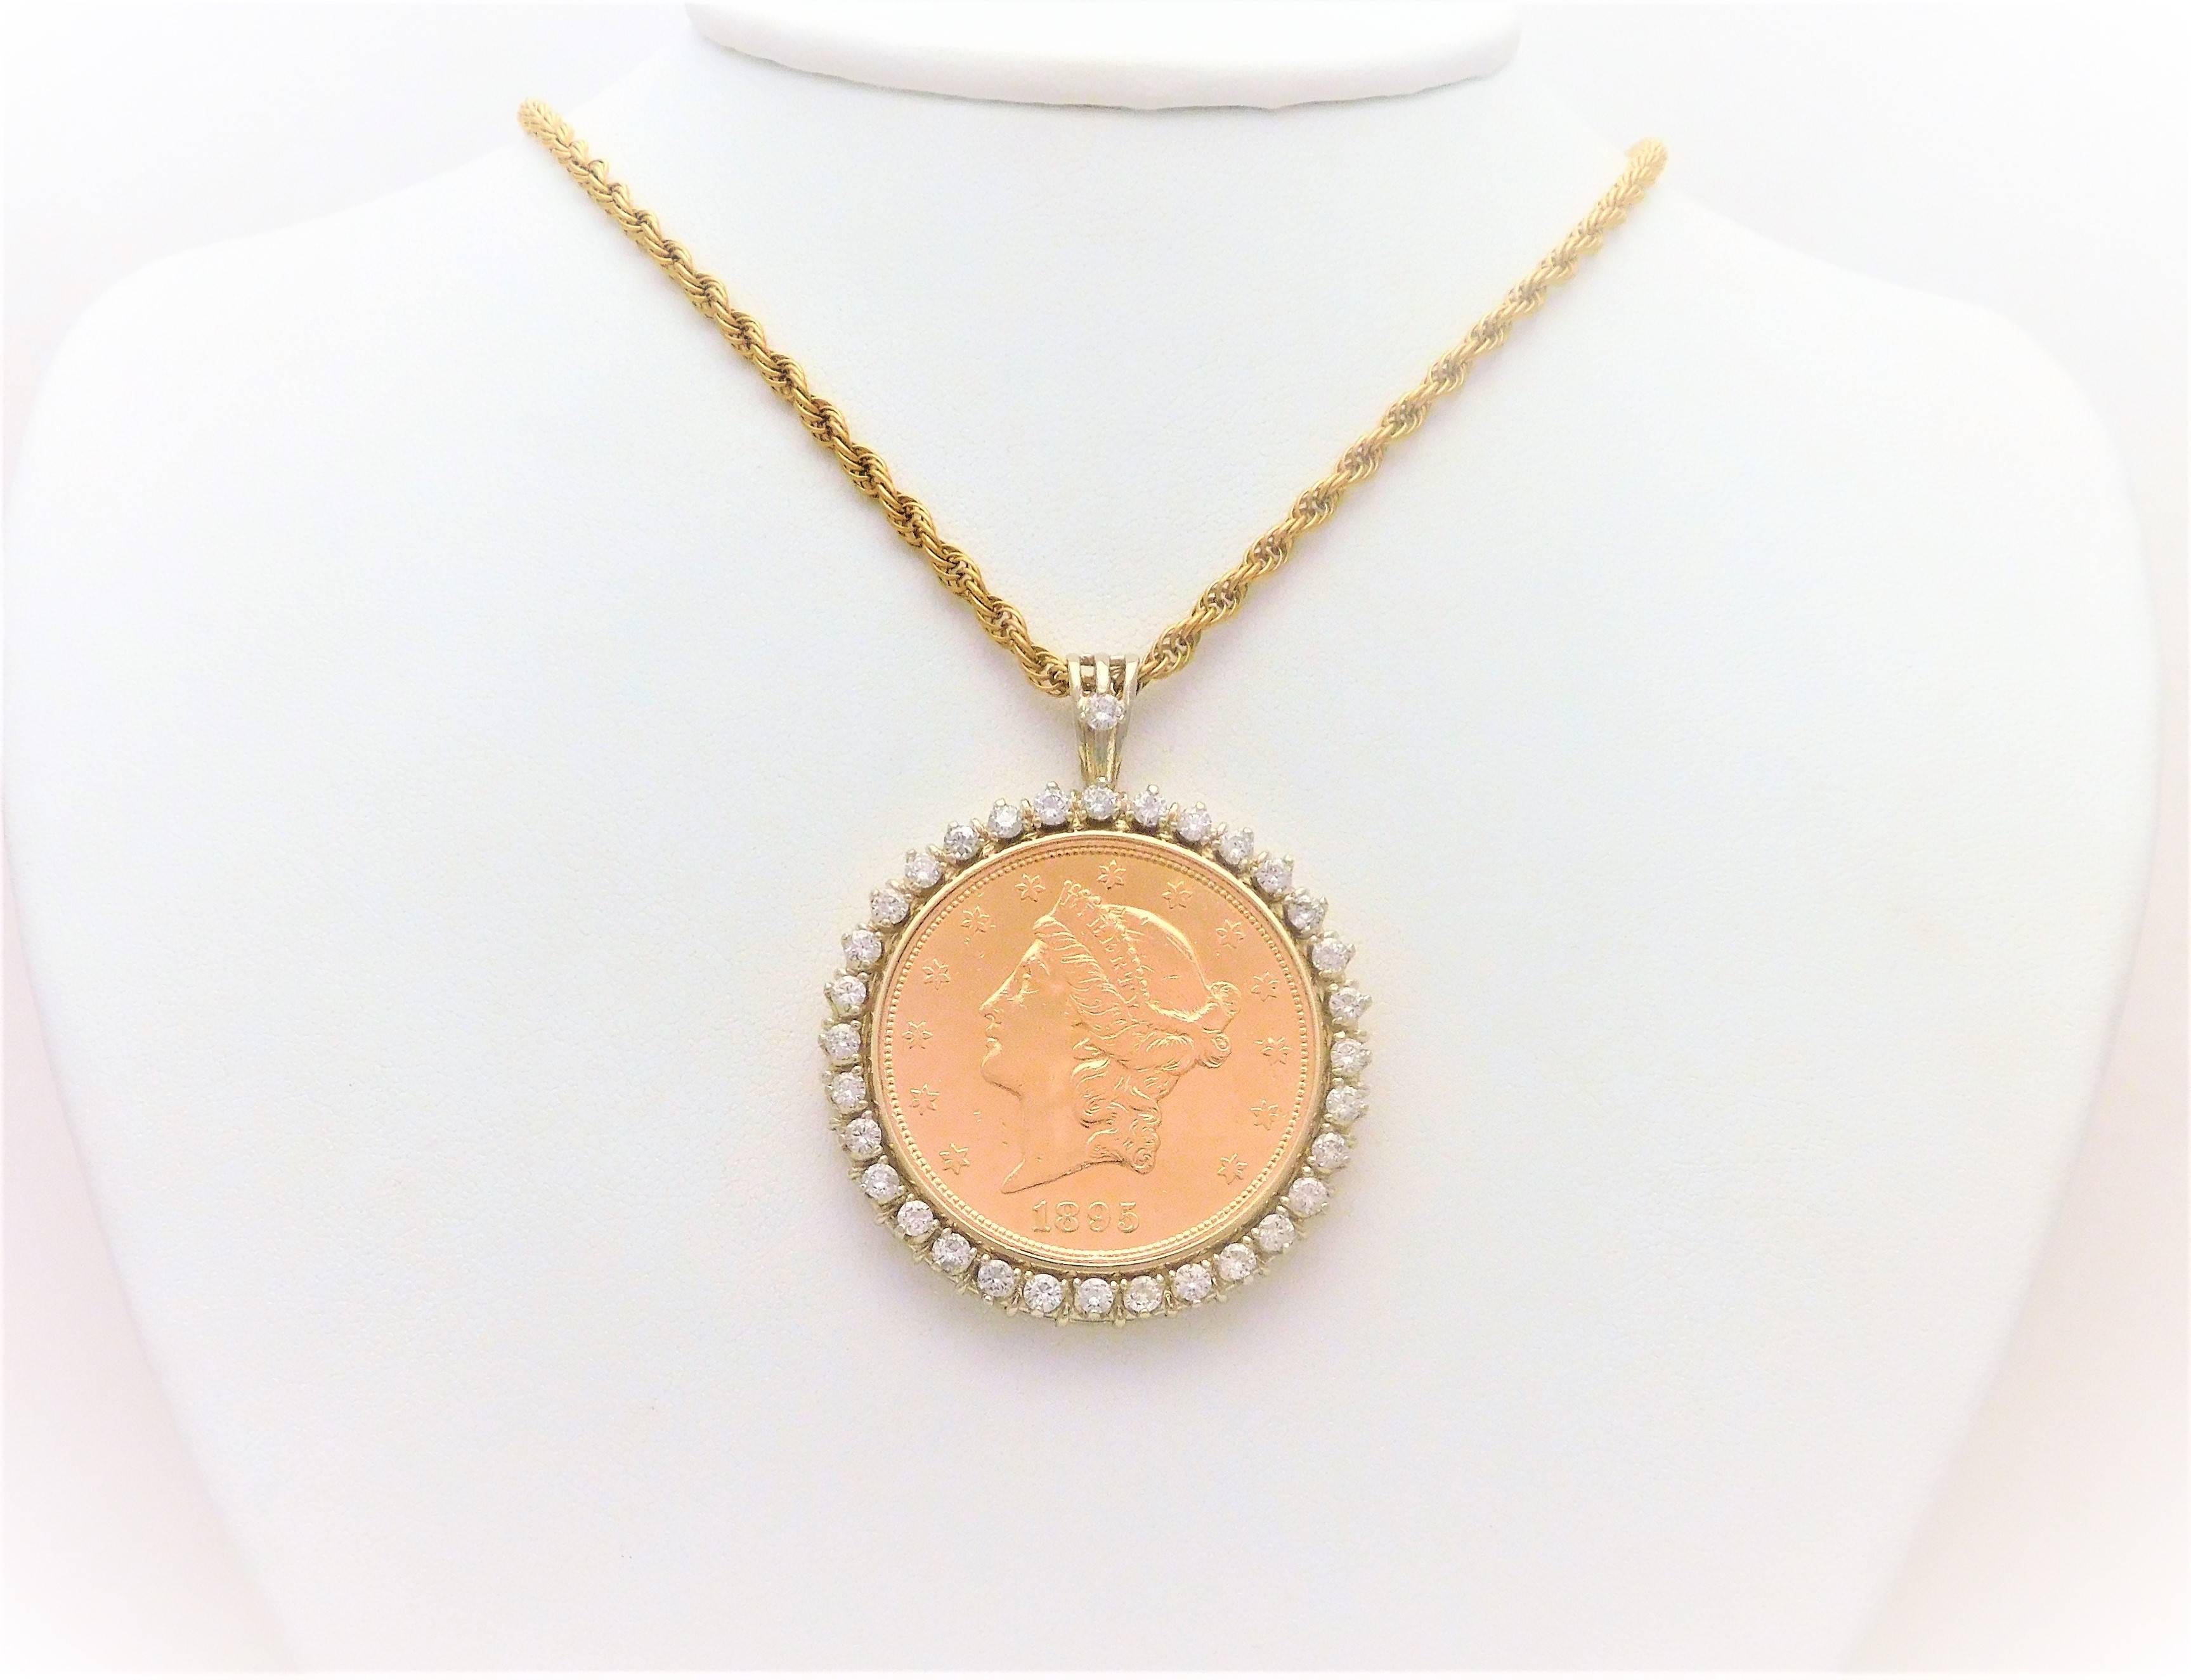 3.20ct Diamond USA 1895-S Twenty Dollar Coin Pendant

From a noble New Orleans estate.  Circa 1960.  This exquisite coin holder pendant has been crafted in solid 14k yellow gold.  It has been jeweled with a gorgeous, slightly circulated, 24k 1845 US